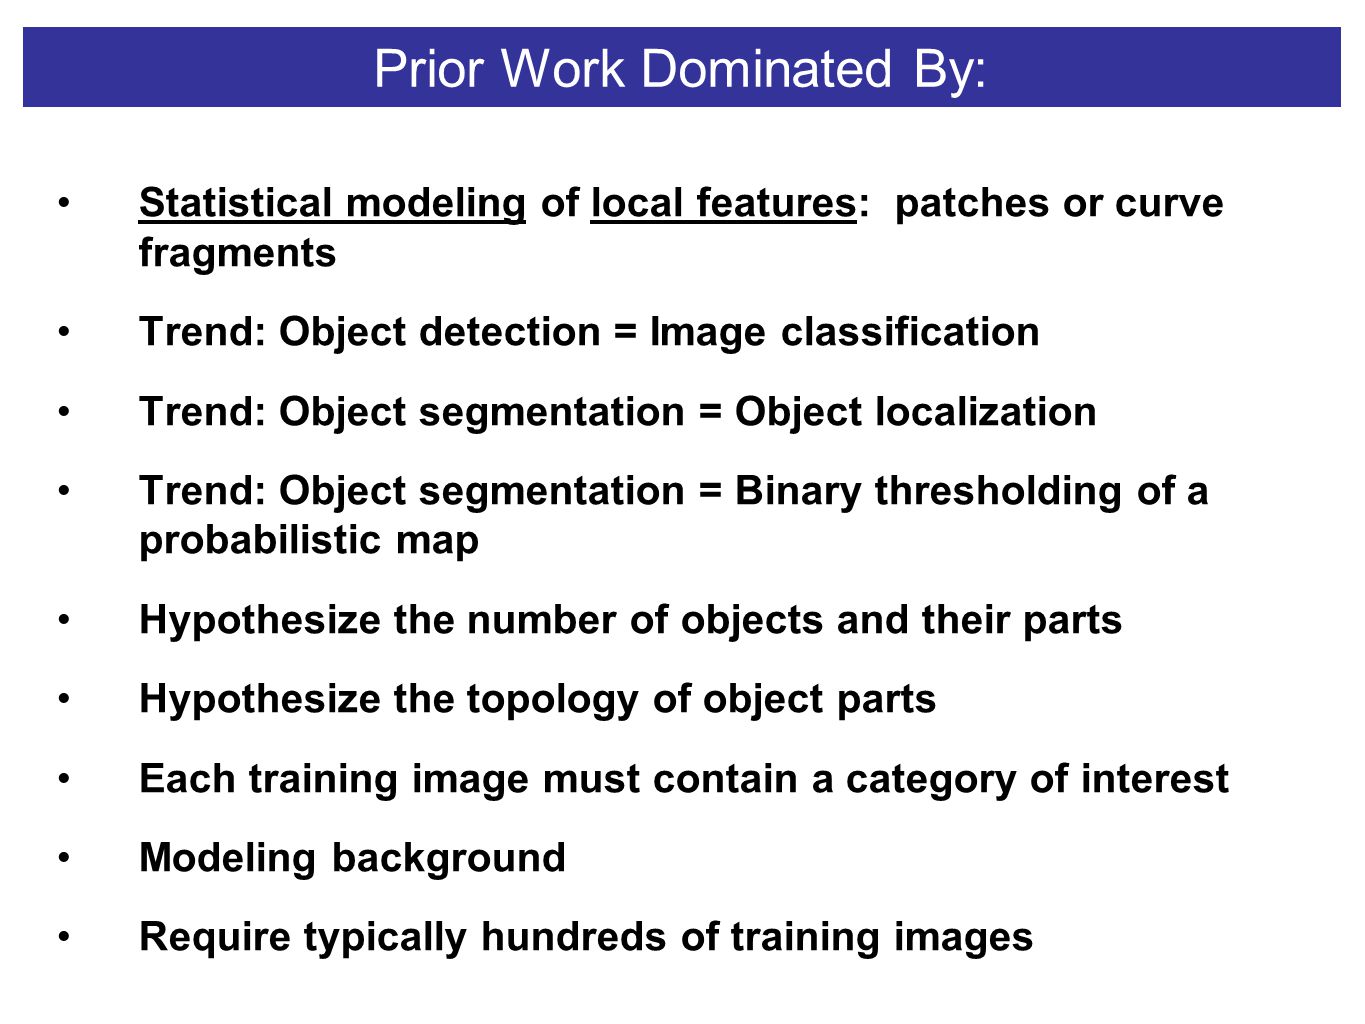 Prior Work Dominated By: Statistical modeling of local features: patches or curve fragments Trend: Object detection = Image classification Trend: Object segmentation = Object localization Trend: Object segmentation = Binary thresholding of a probabilistic map Hypothesize the number of objects and their parts Hypothesize the topology of object parts Each training image must contain a category of interest Modeling background Require typically hundreds of training images